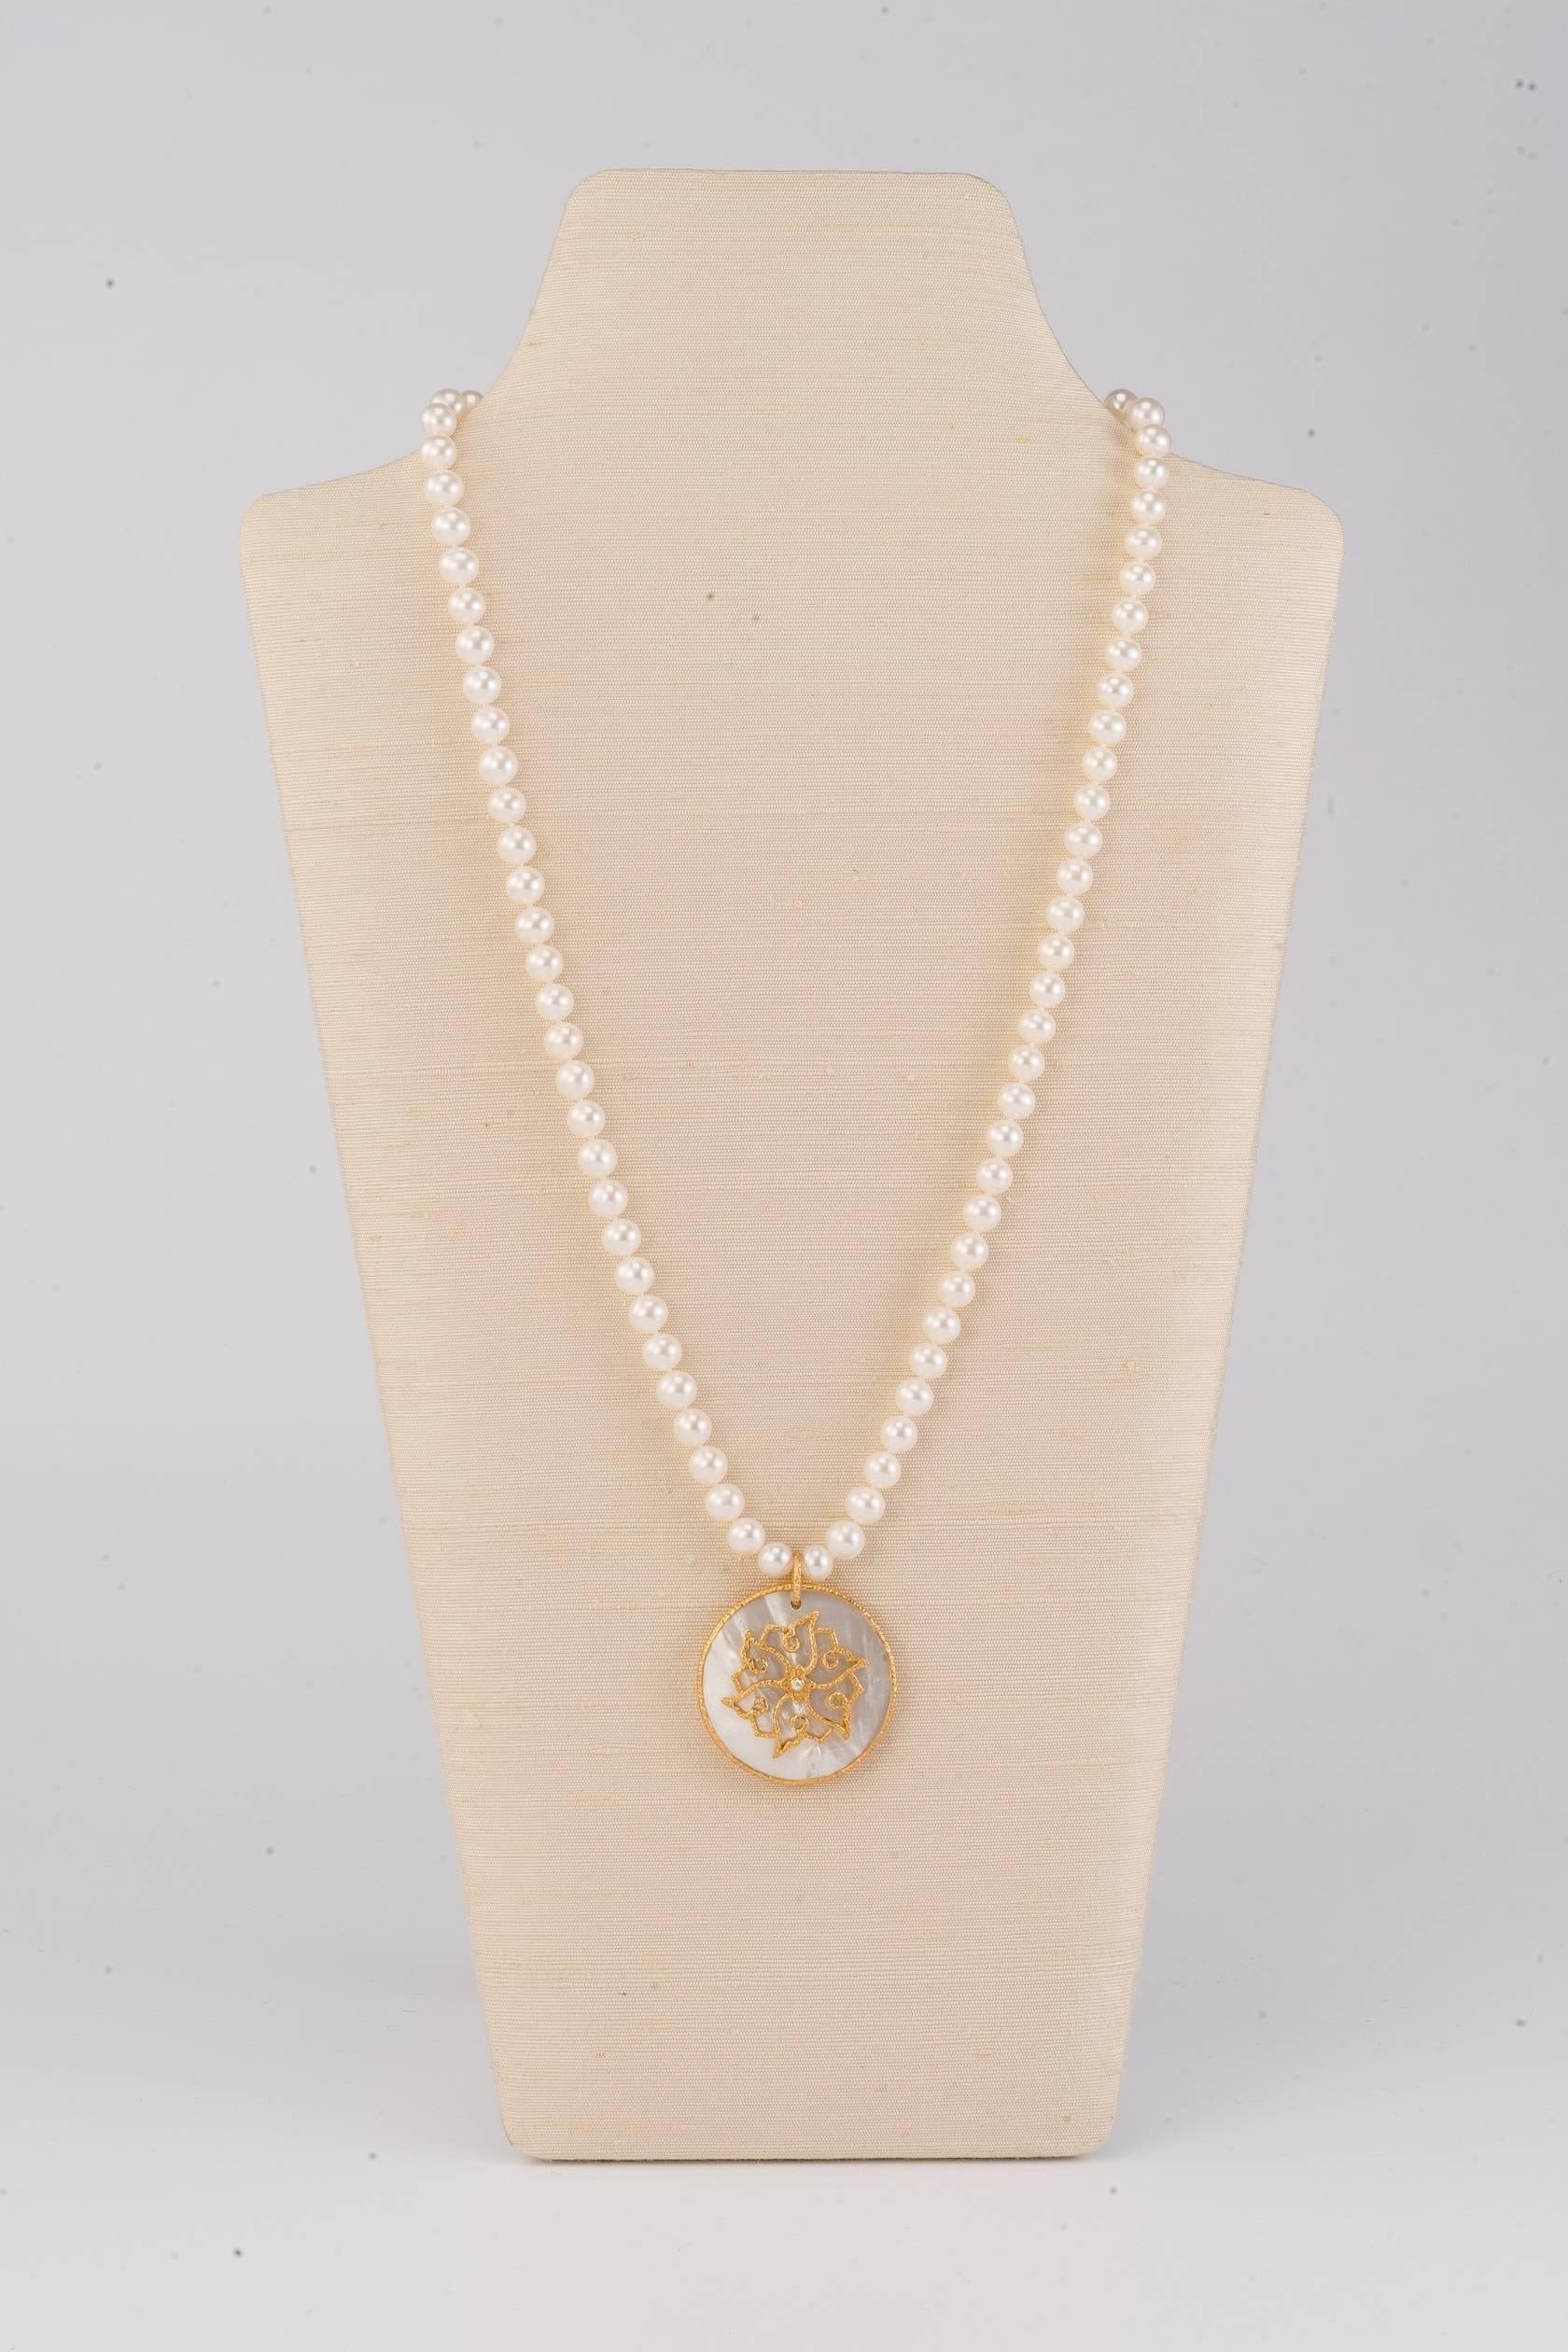 Contemporary Pearl Necklace, Hand-Hammered 18K Gold, Diamond & MOP Chinoiserie Lotus Pendant